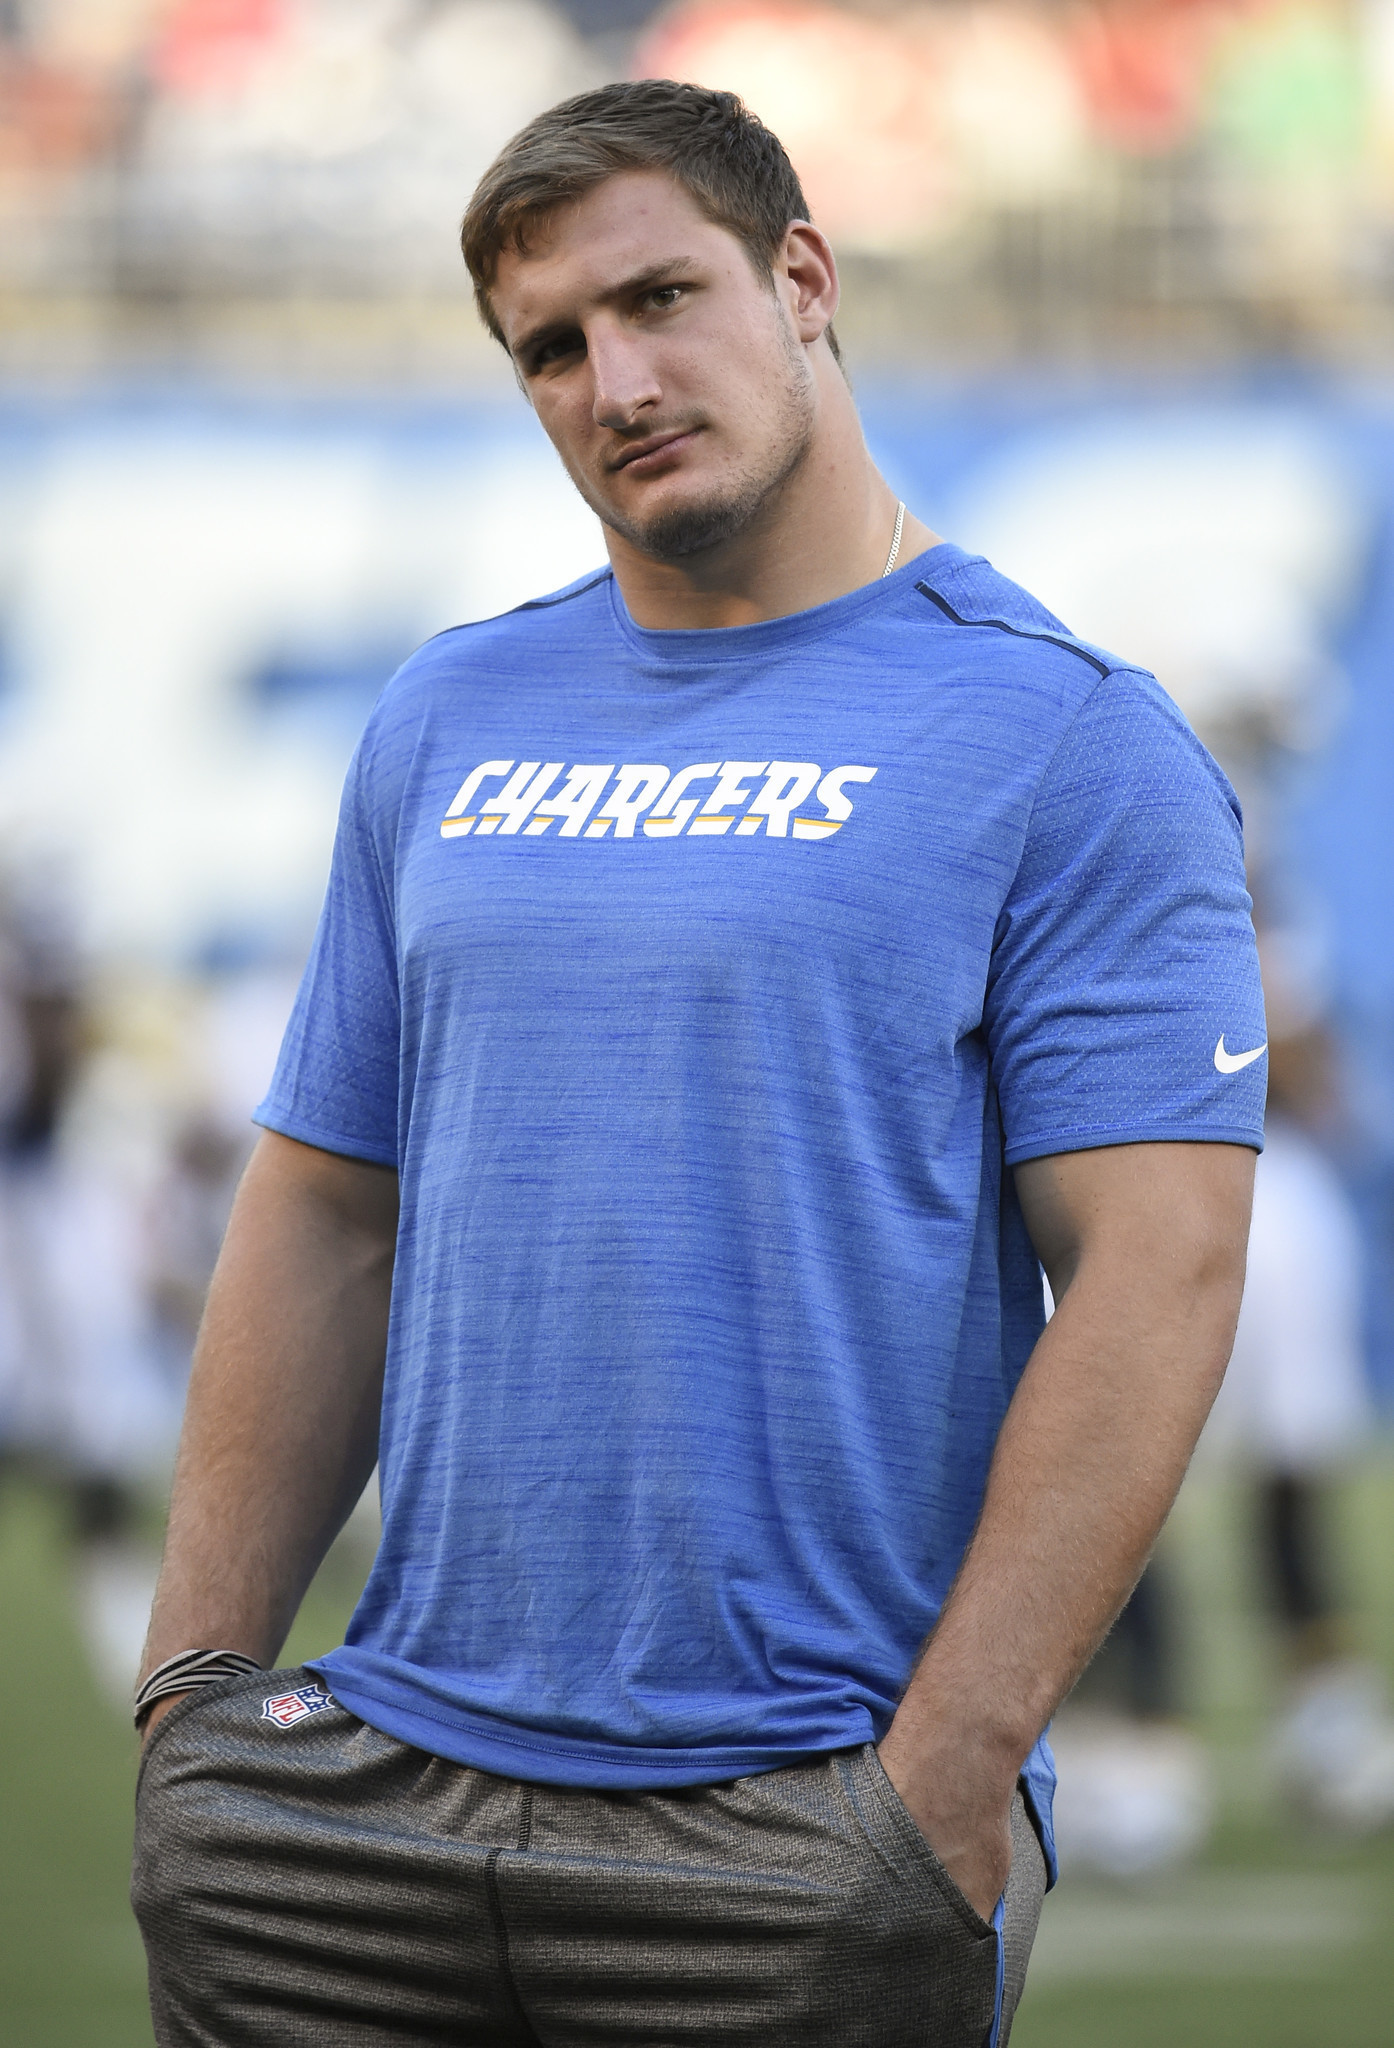 Joey Bosa unlikely to debut Sunday vs. Jags - The San Diego Union-Tribune